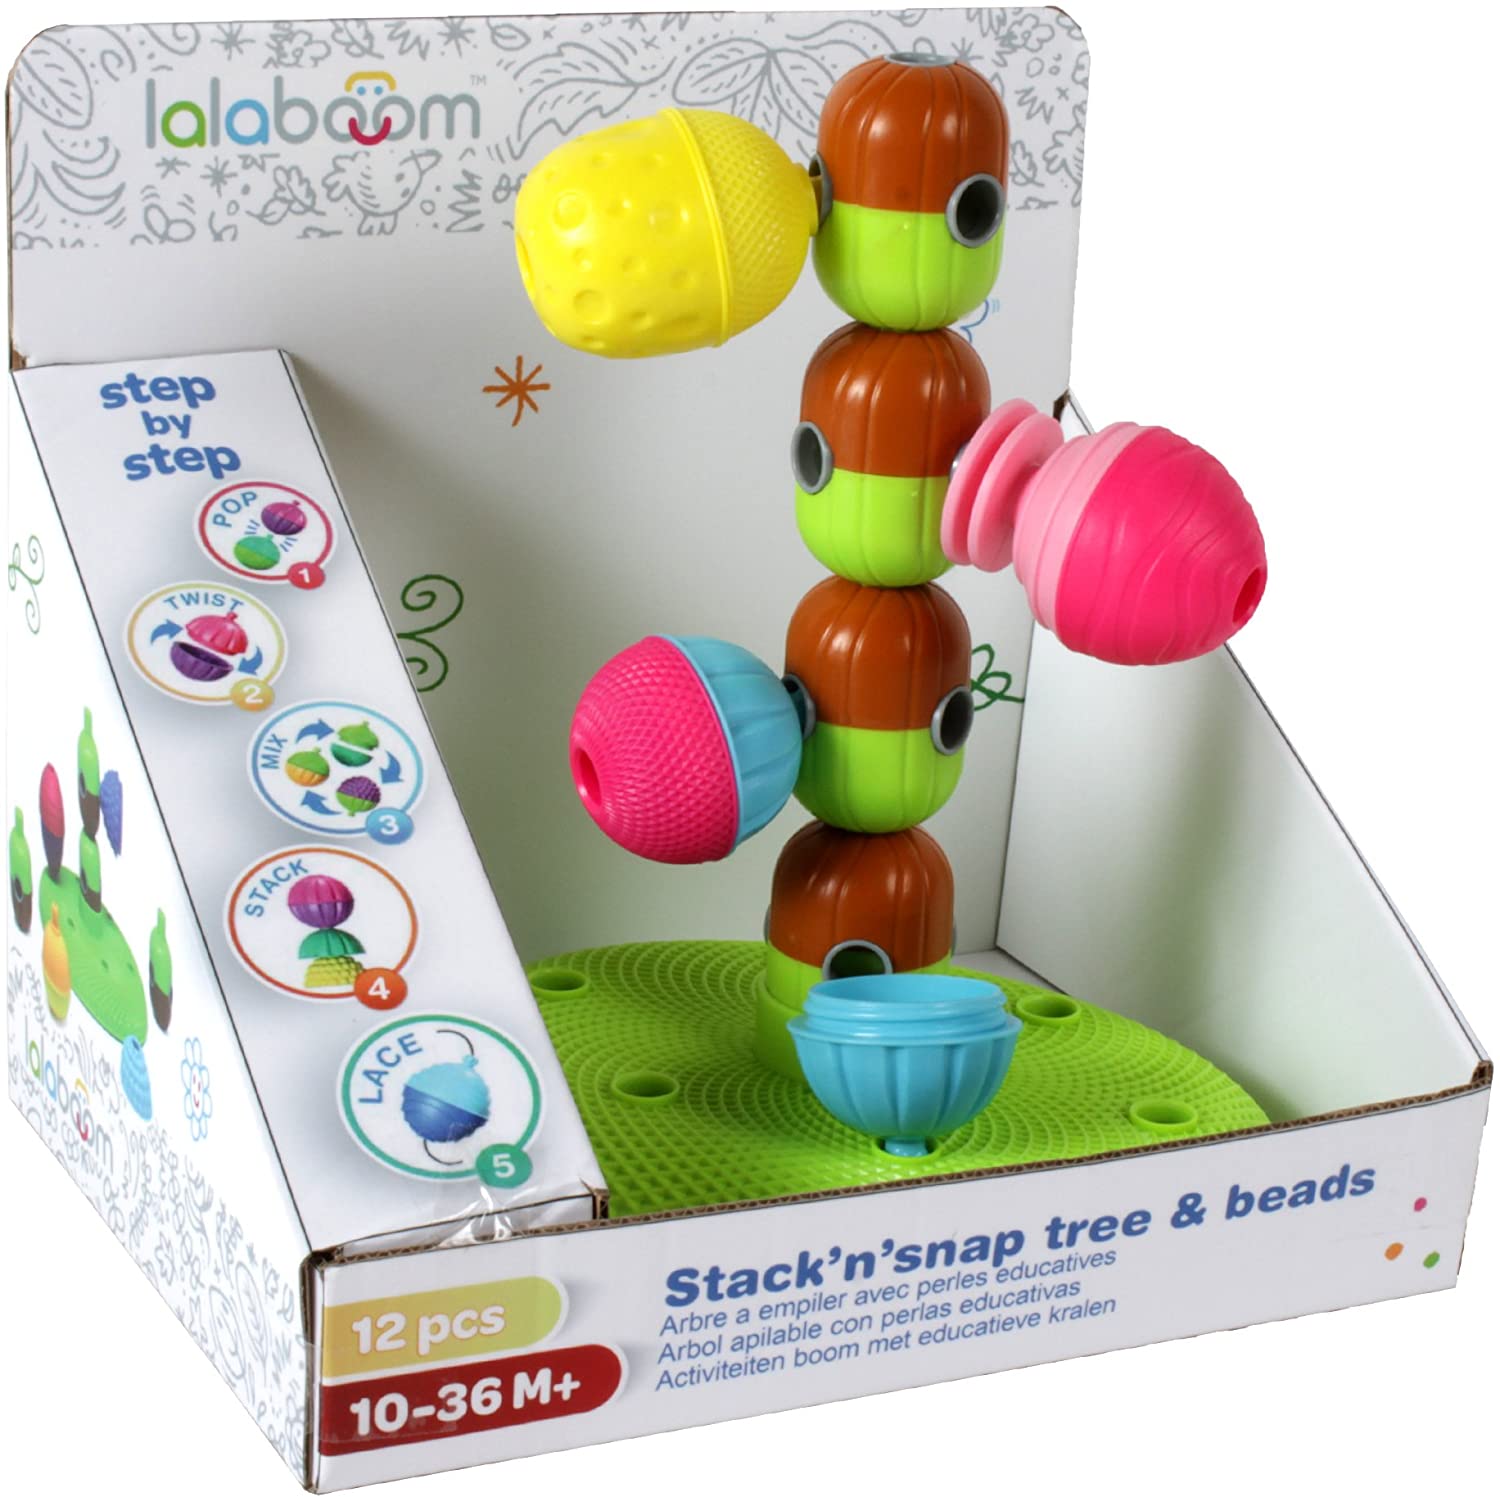 Lalaboom Educational Beads And Accessories 48Pk – IEWAREHOUSE